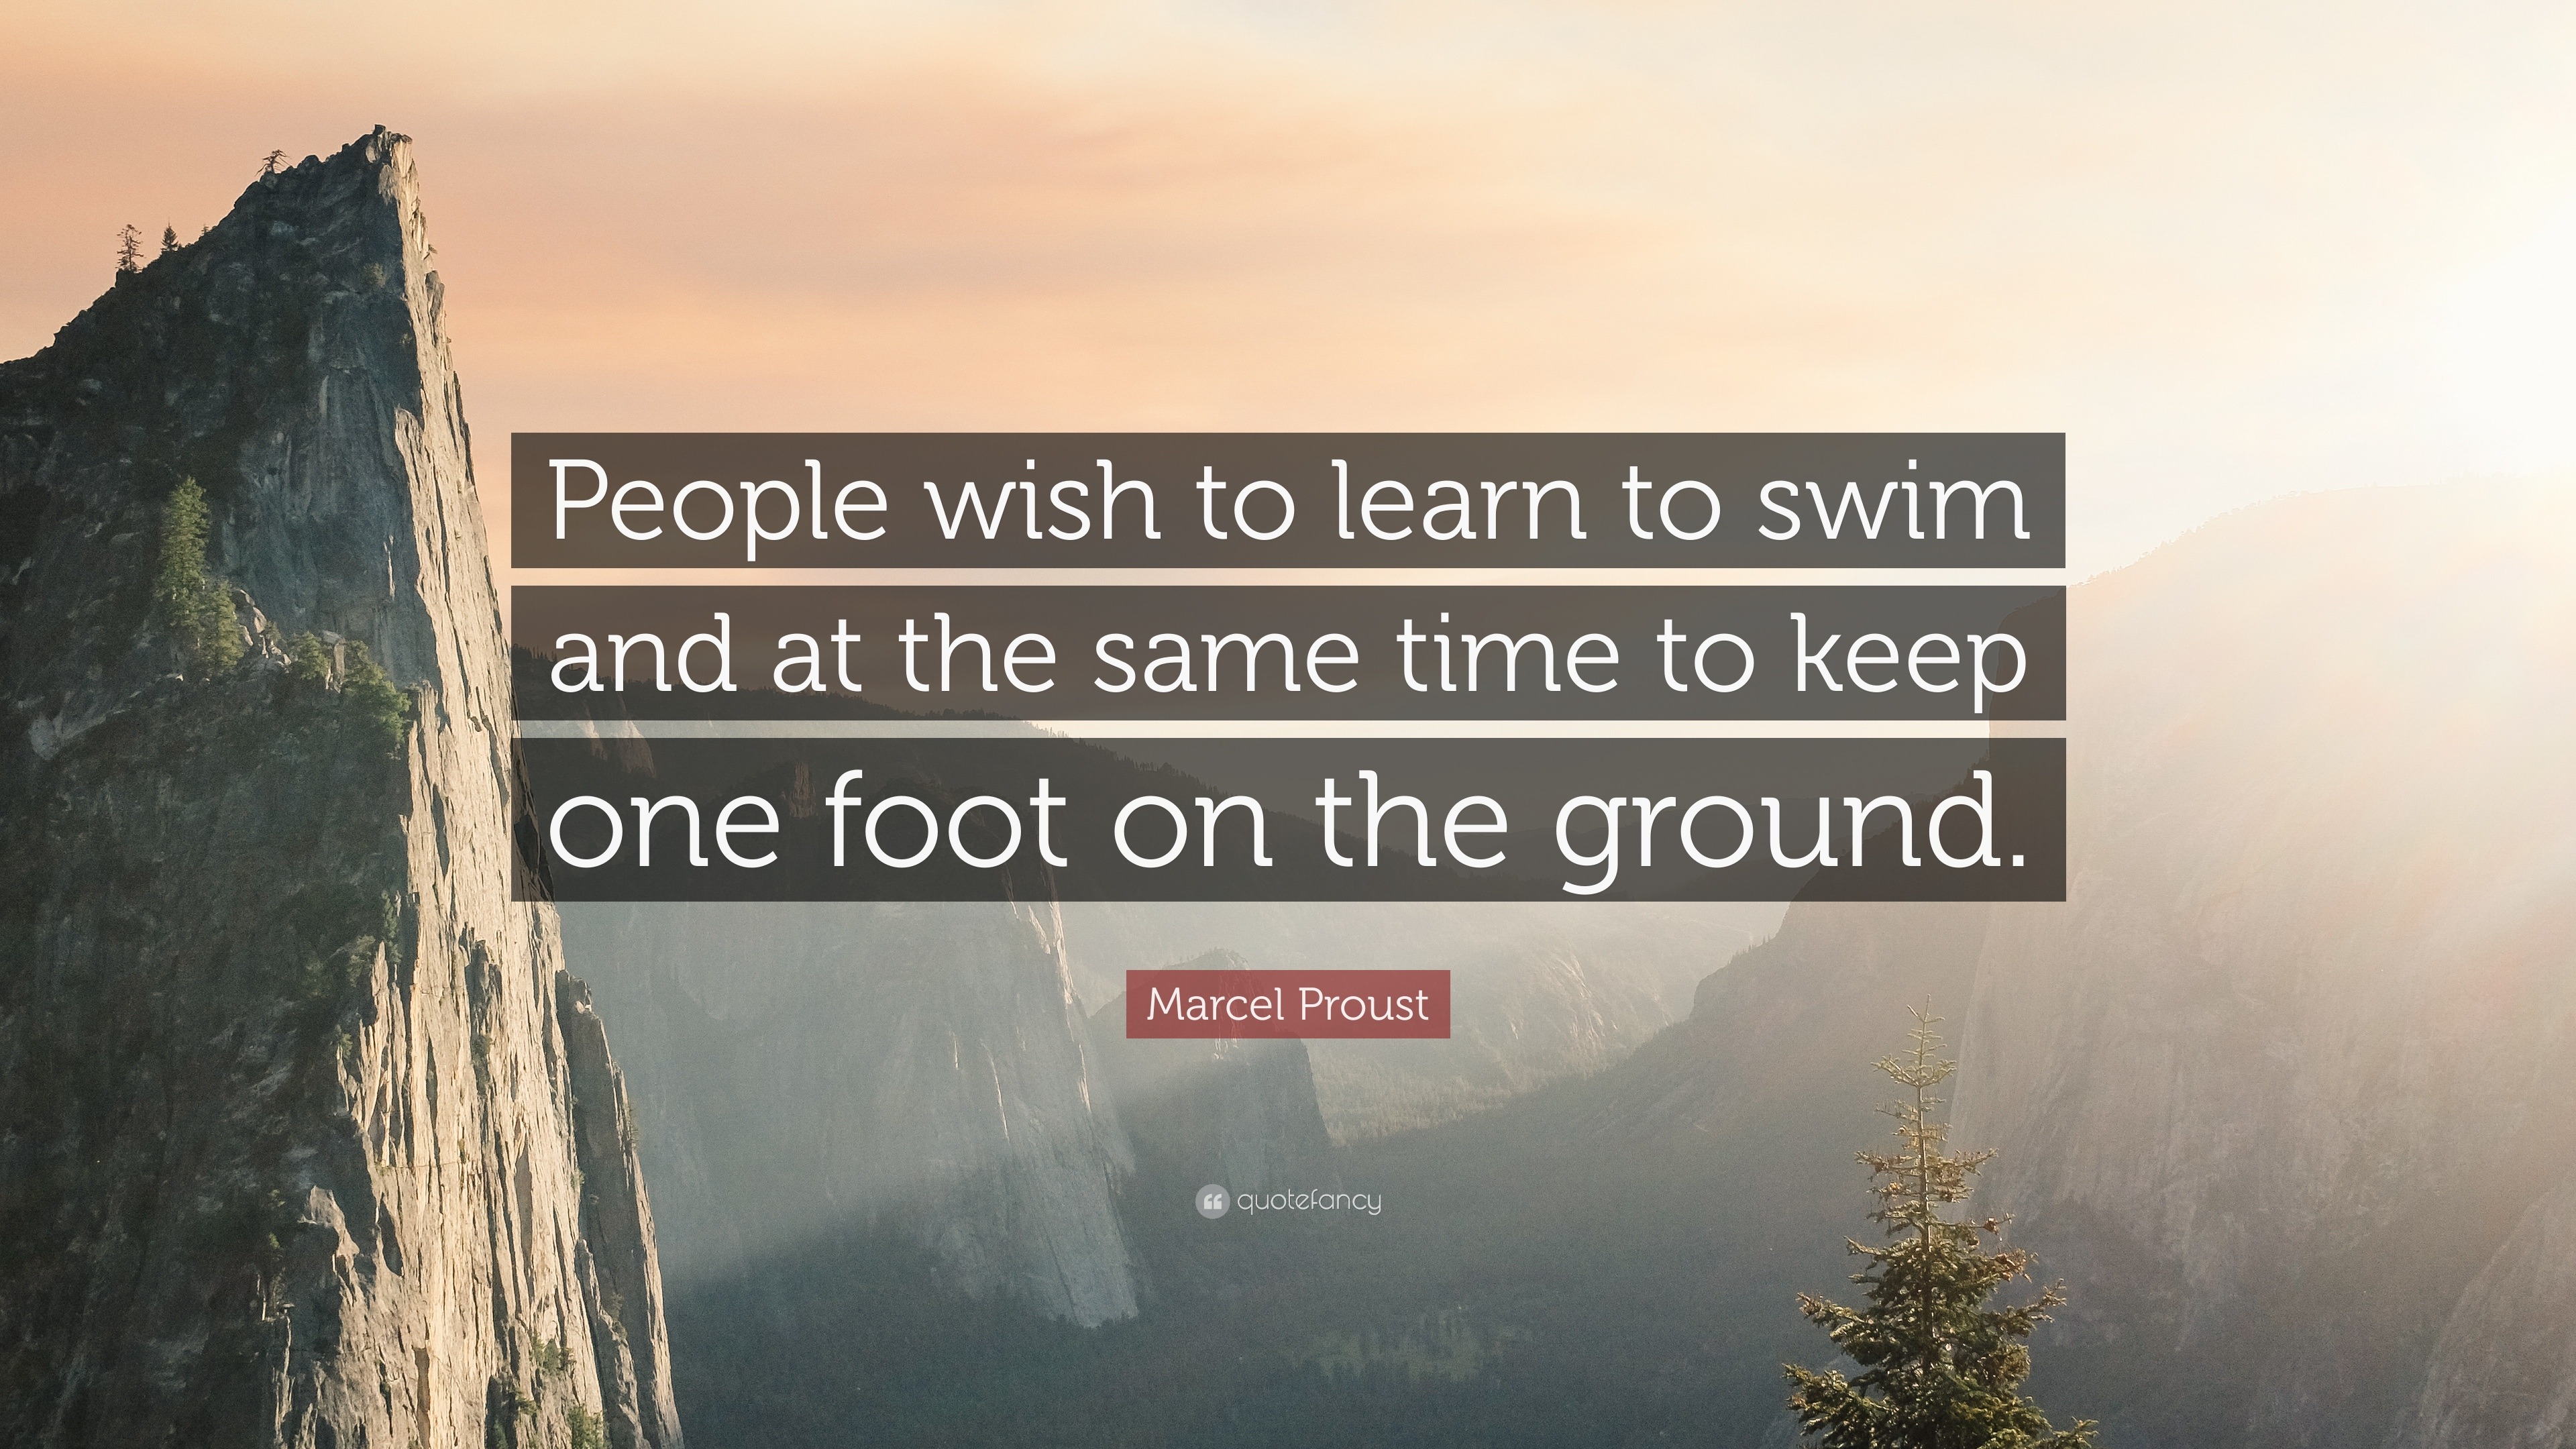 Marcel Proust Quote: “People wish to learn to swim and at the same